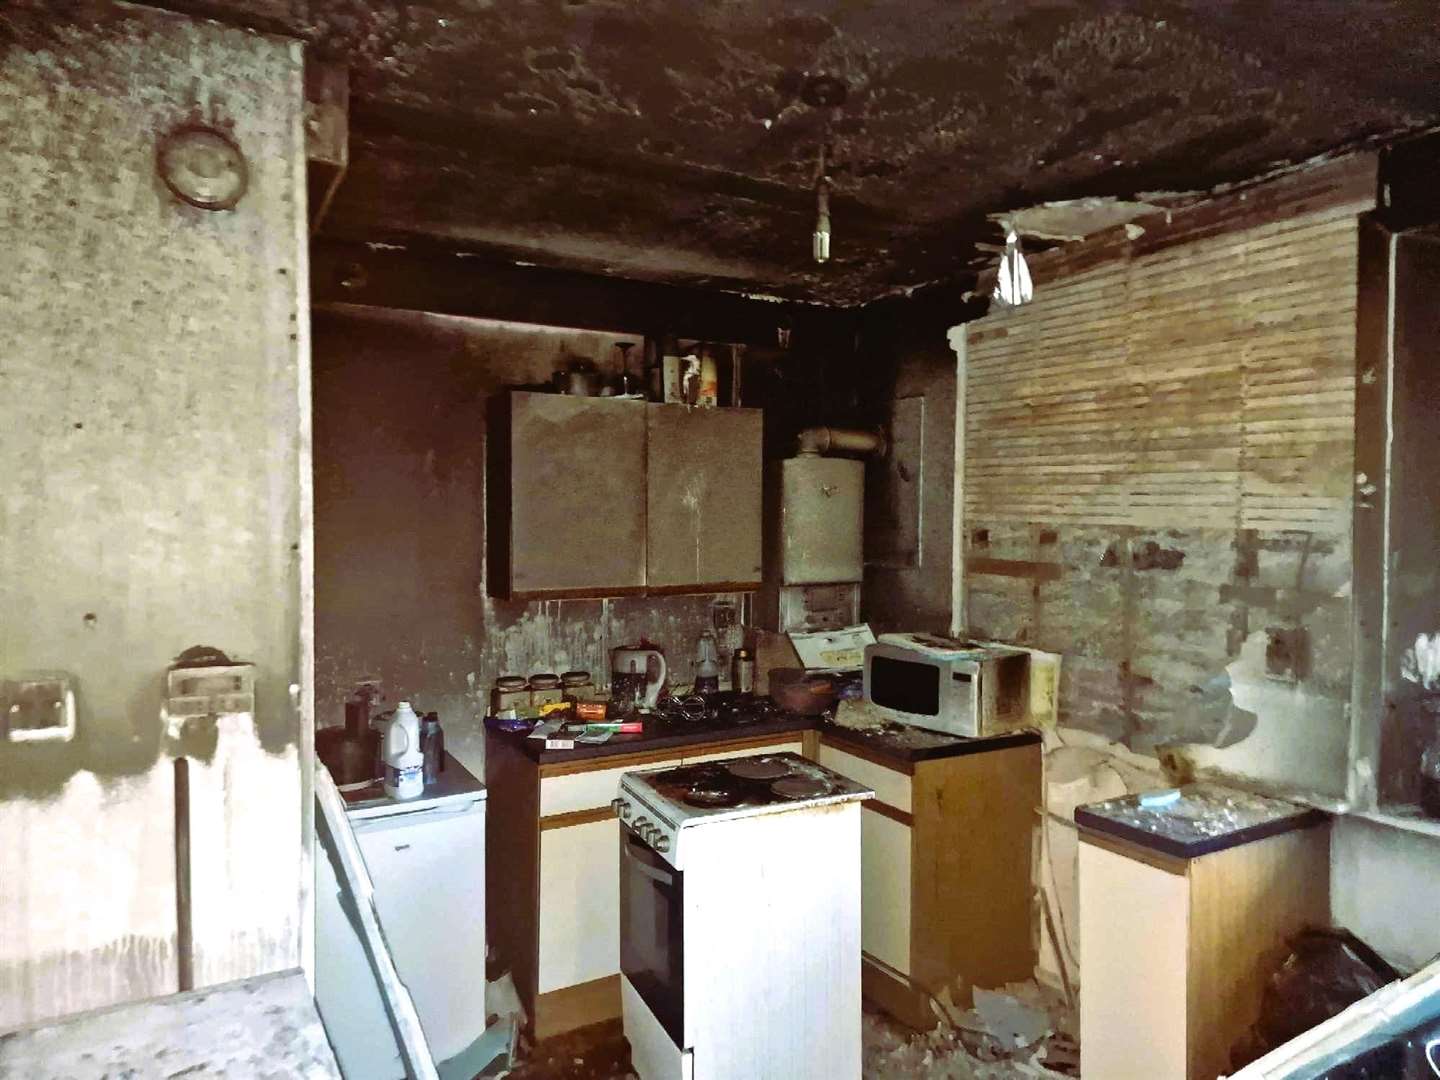 Interior of David Mackinnon's house after the fire in Wick that made him homeless.